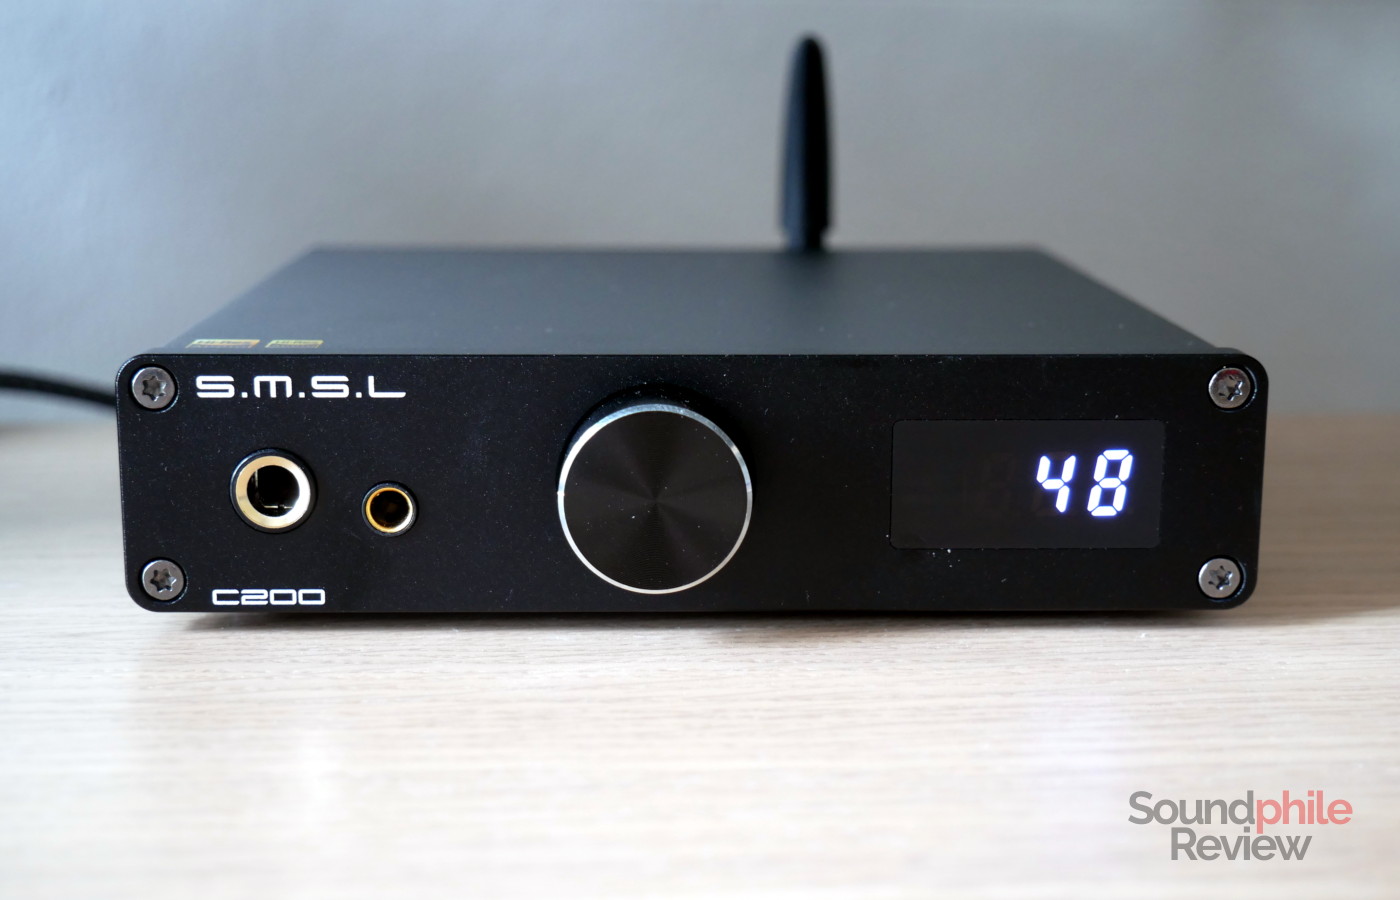 SMSL C200 review: tiny but mighty - Soundphile Review